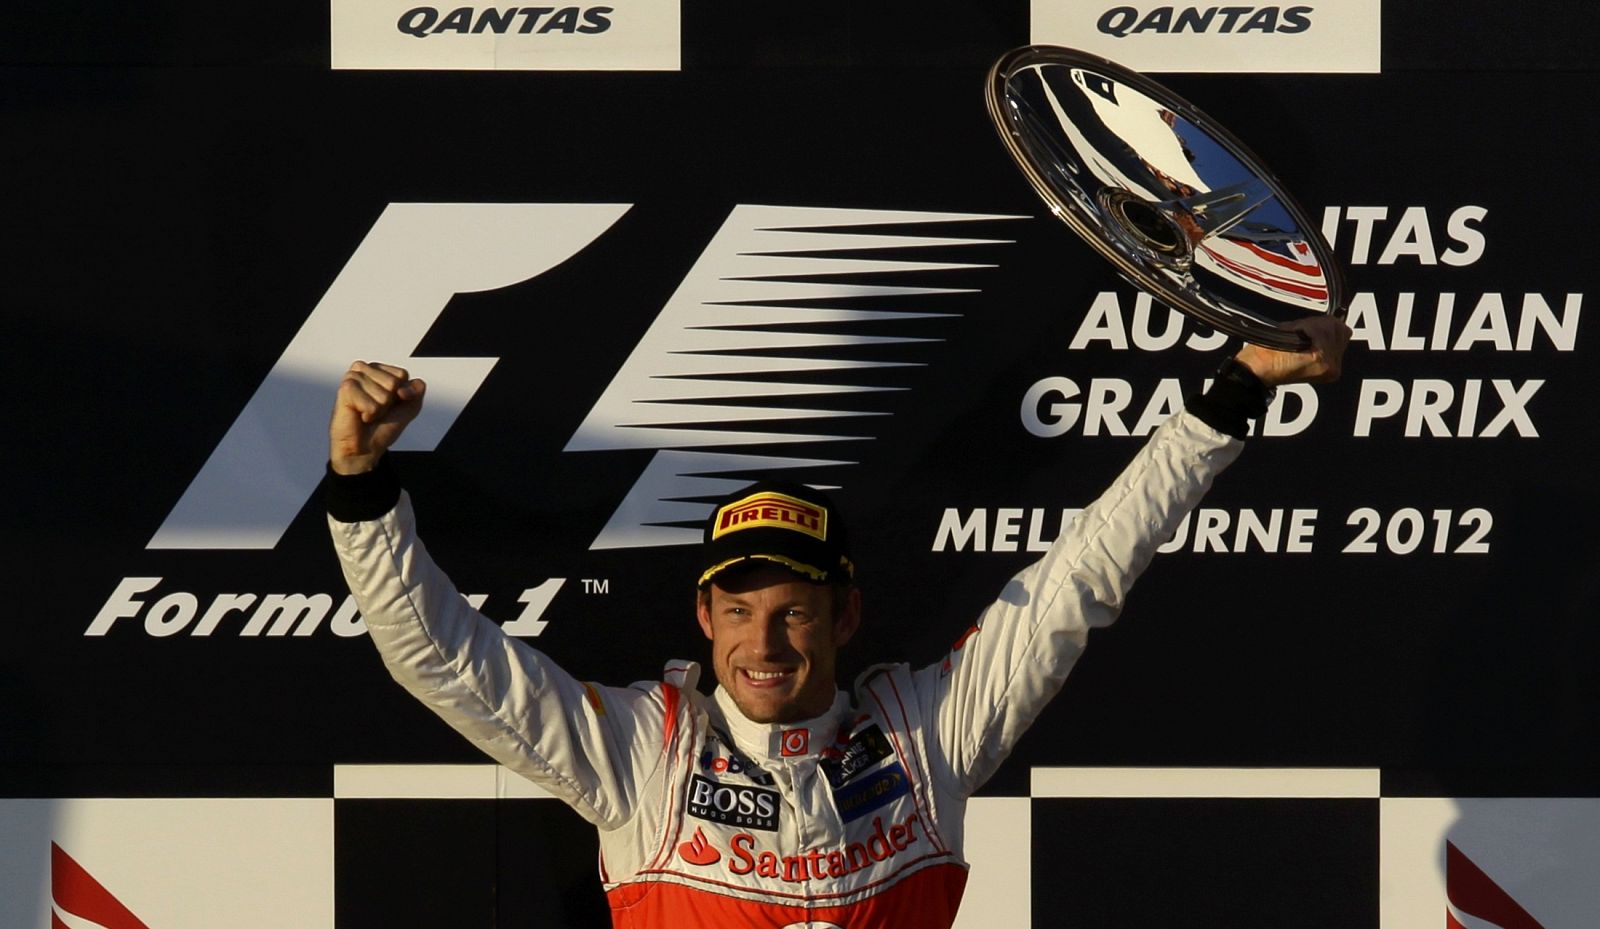 McLaren Formula One driver Button celebrates his victory on the podium after the Australian F1 Grand Prix at the Albert Park circuit in Melbourne